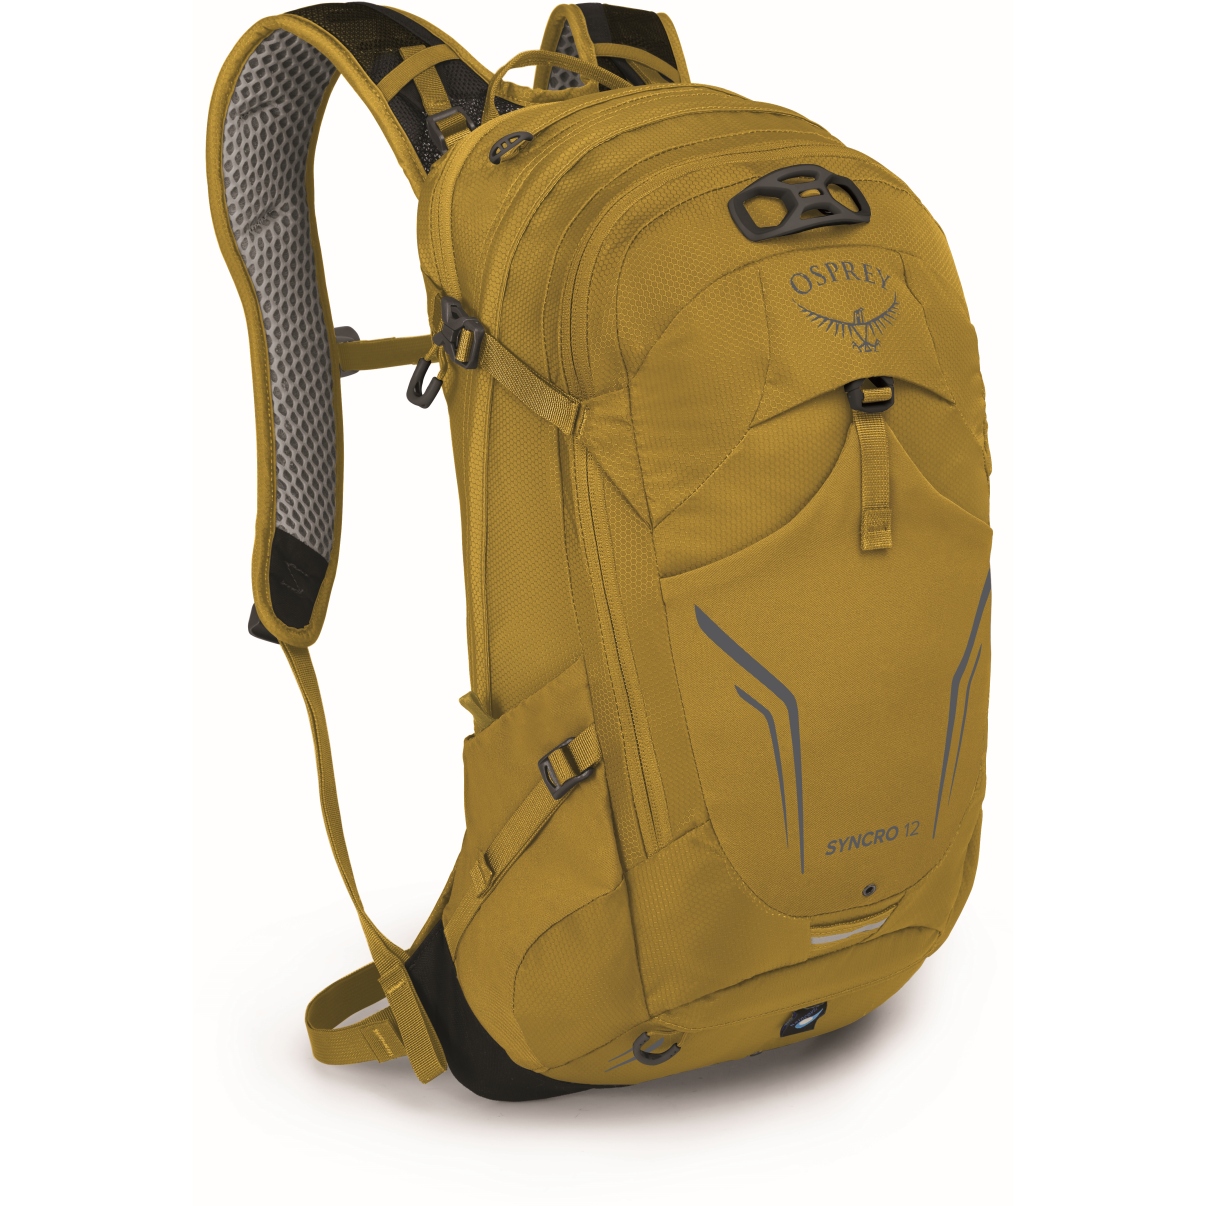 Picture of Osprey Syncro 12 Backpack - Primavera Yellow